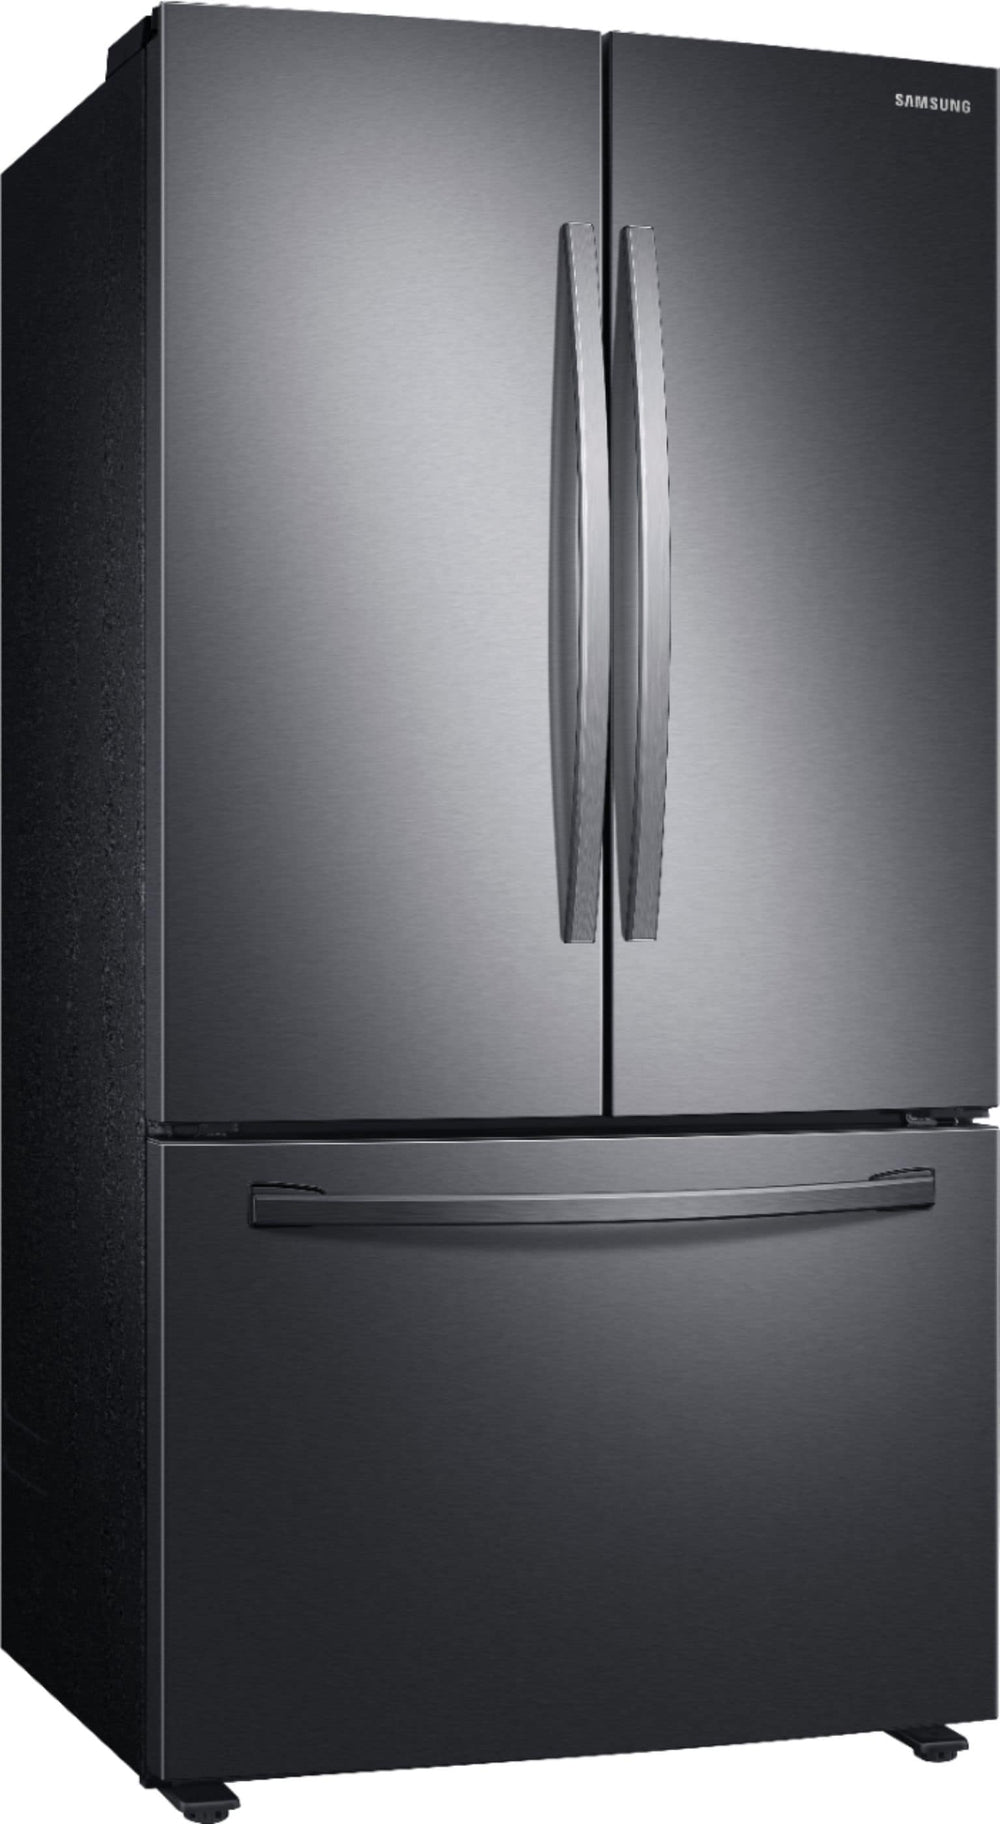 Samsung - 28 cu. ft. Large Capacity 3-Door French Door Refrigerator with AutoFill Water Pitcher - Black stainless steel_1